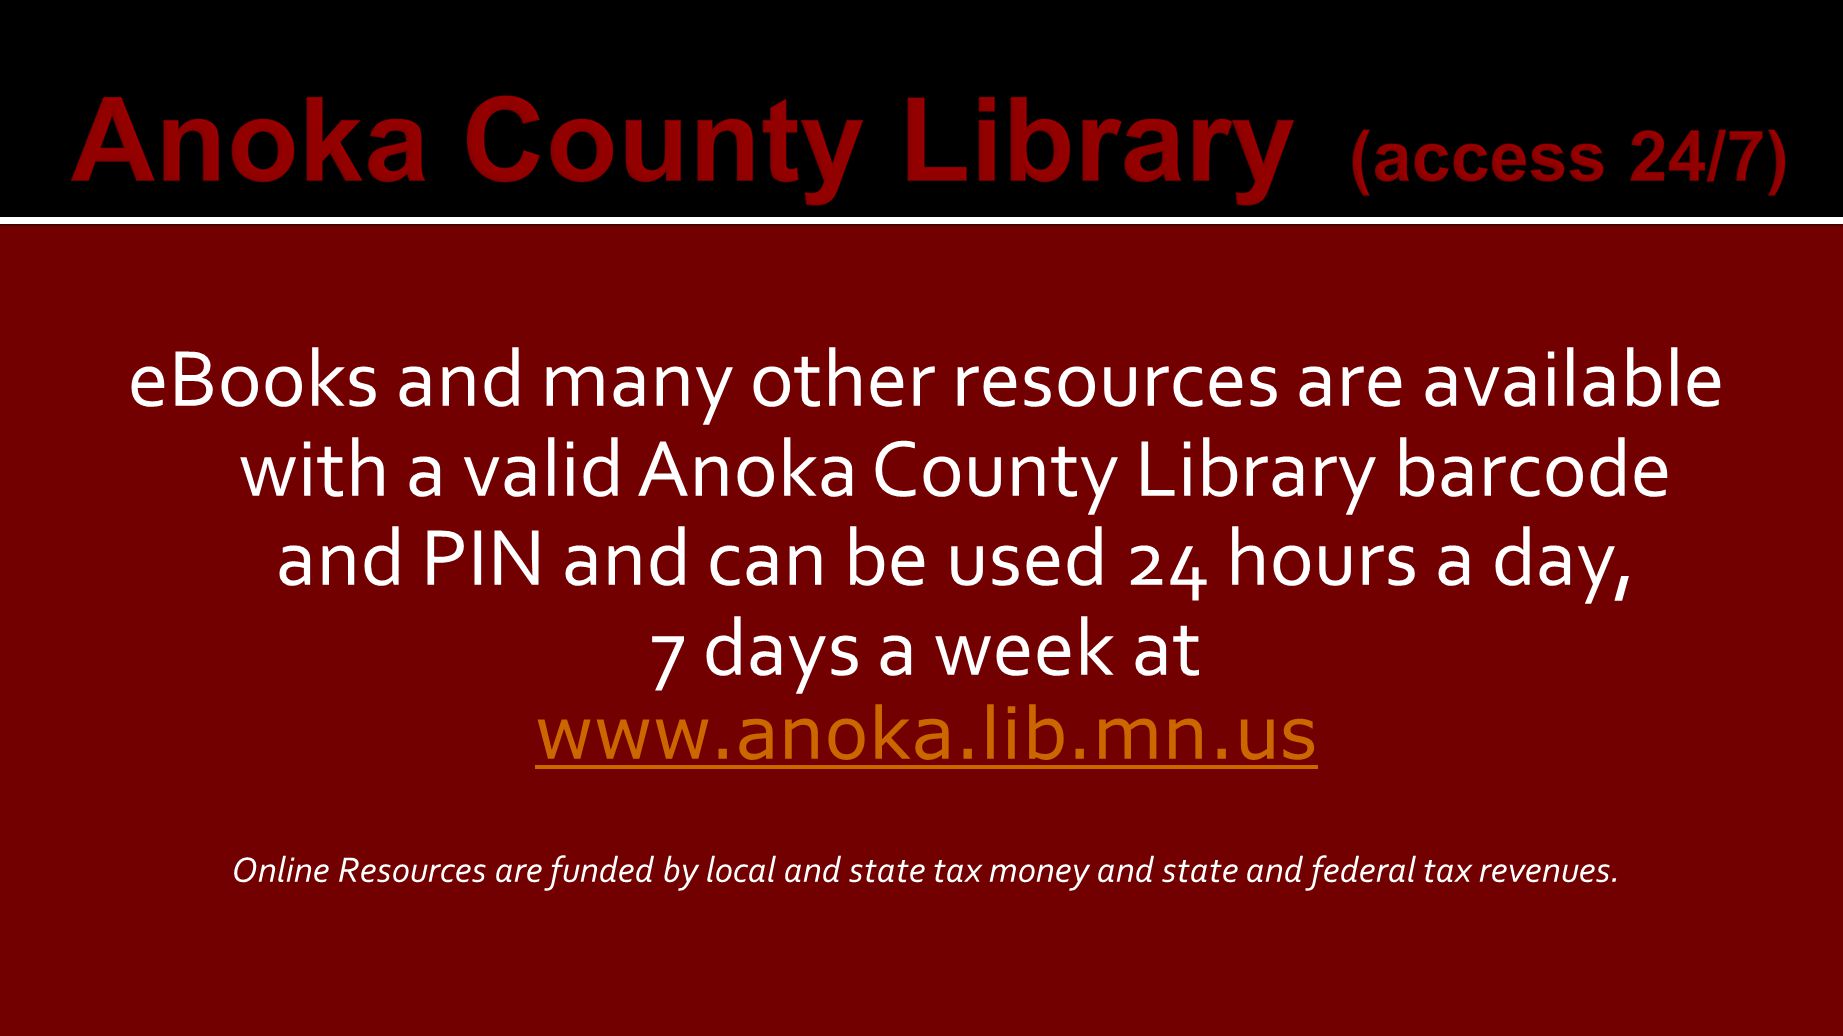 eBooks and many other resources are available with a valid Anoka County Library barcode and PIN and can be used 24 hours a day, 7 days a week at   Online Resources are funded by local and state tax money and state and federal tax revenues.